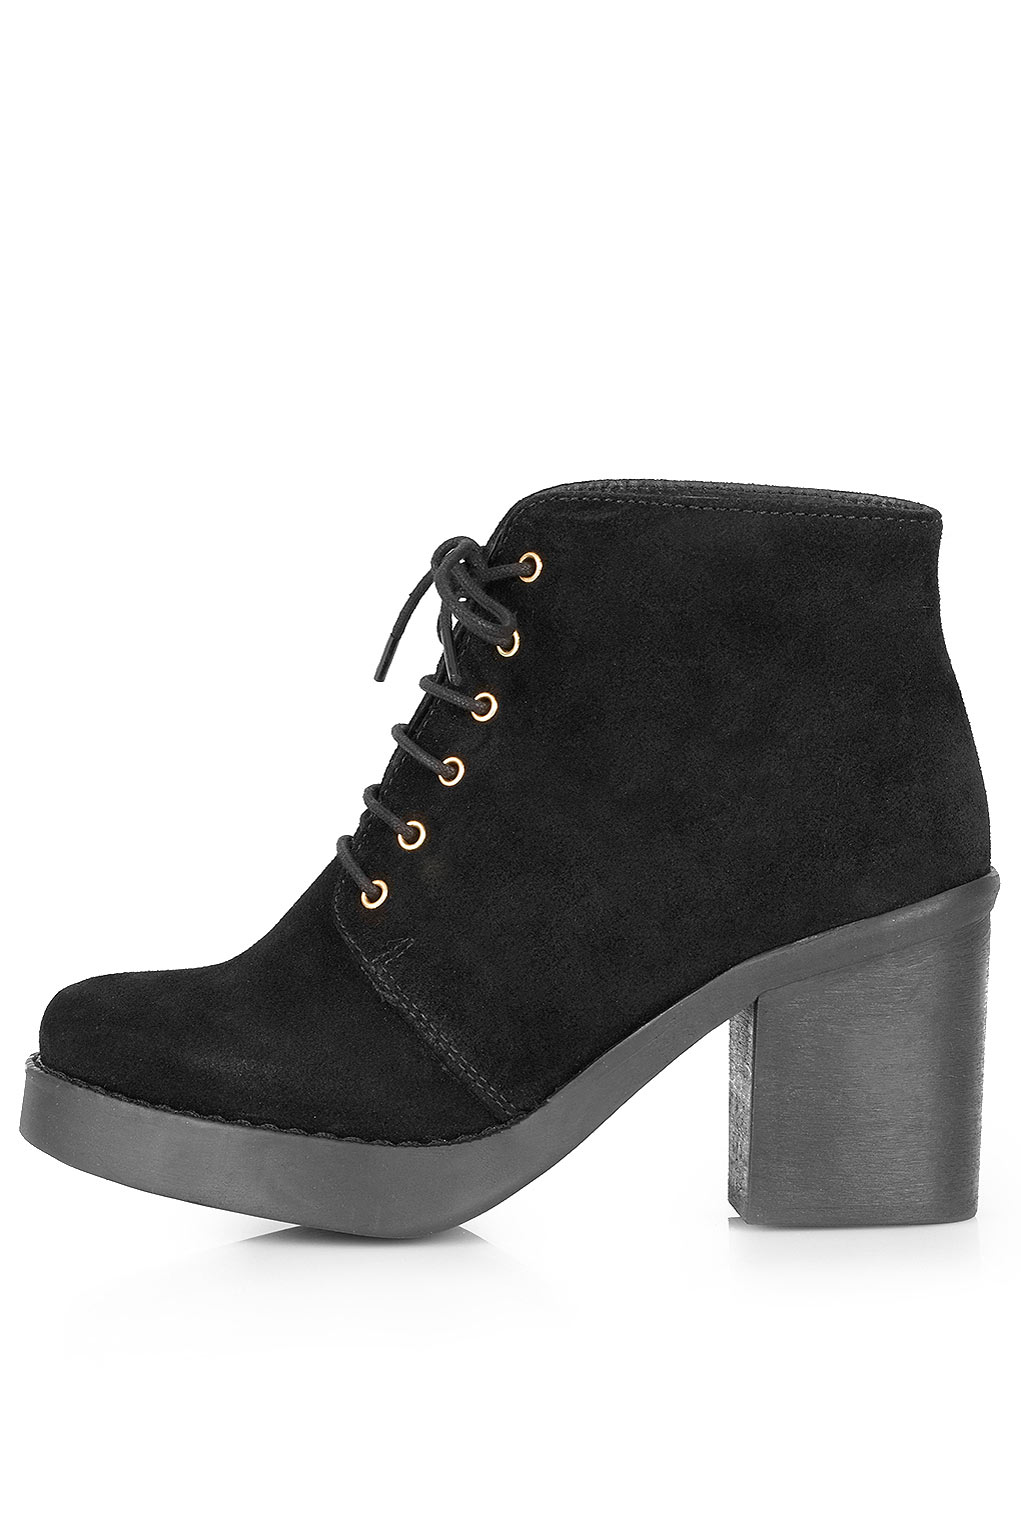 Lyst - Topshop Athena Lace-up Ankle Boots in Black